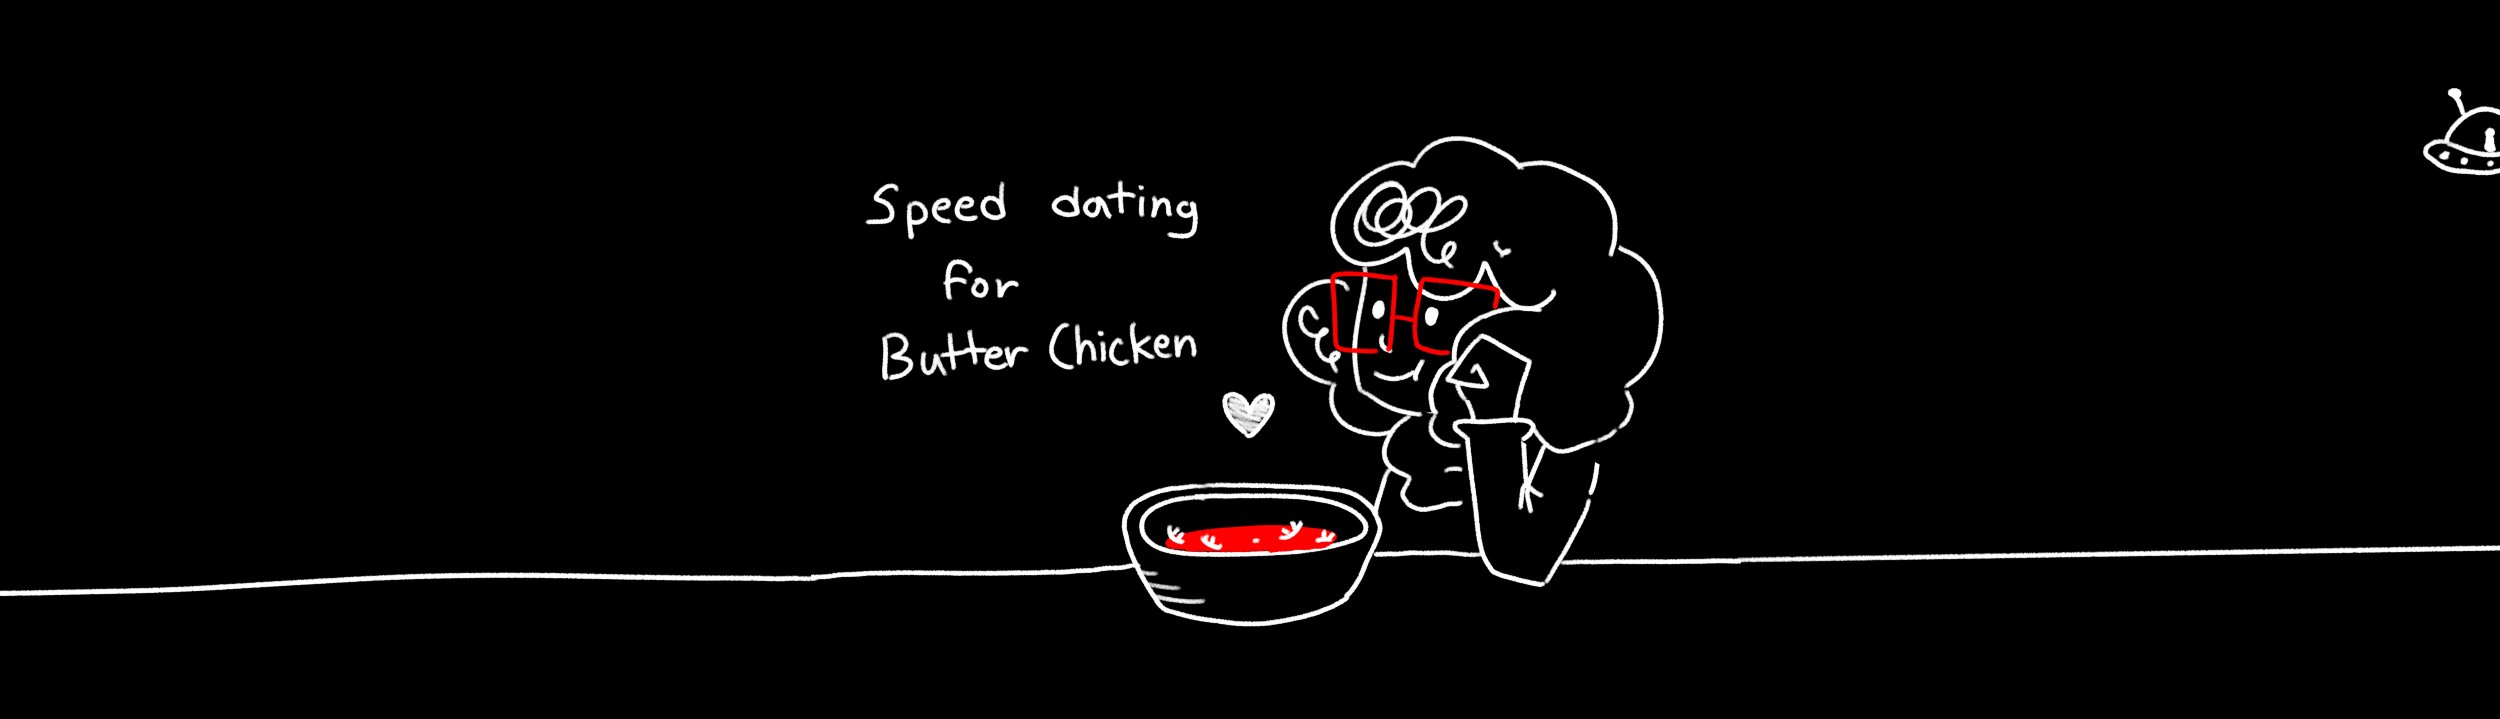 Speed Dating for Butter Chicken